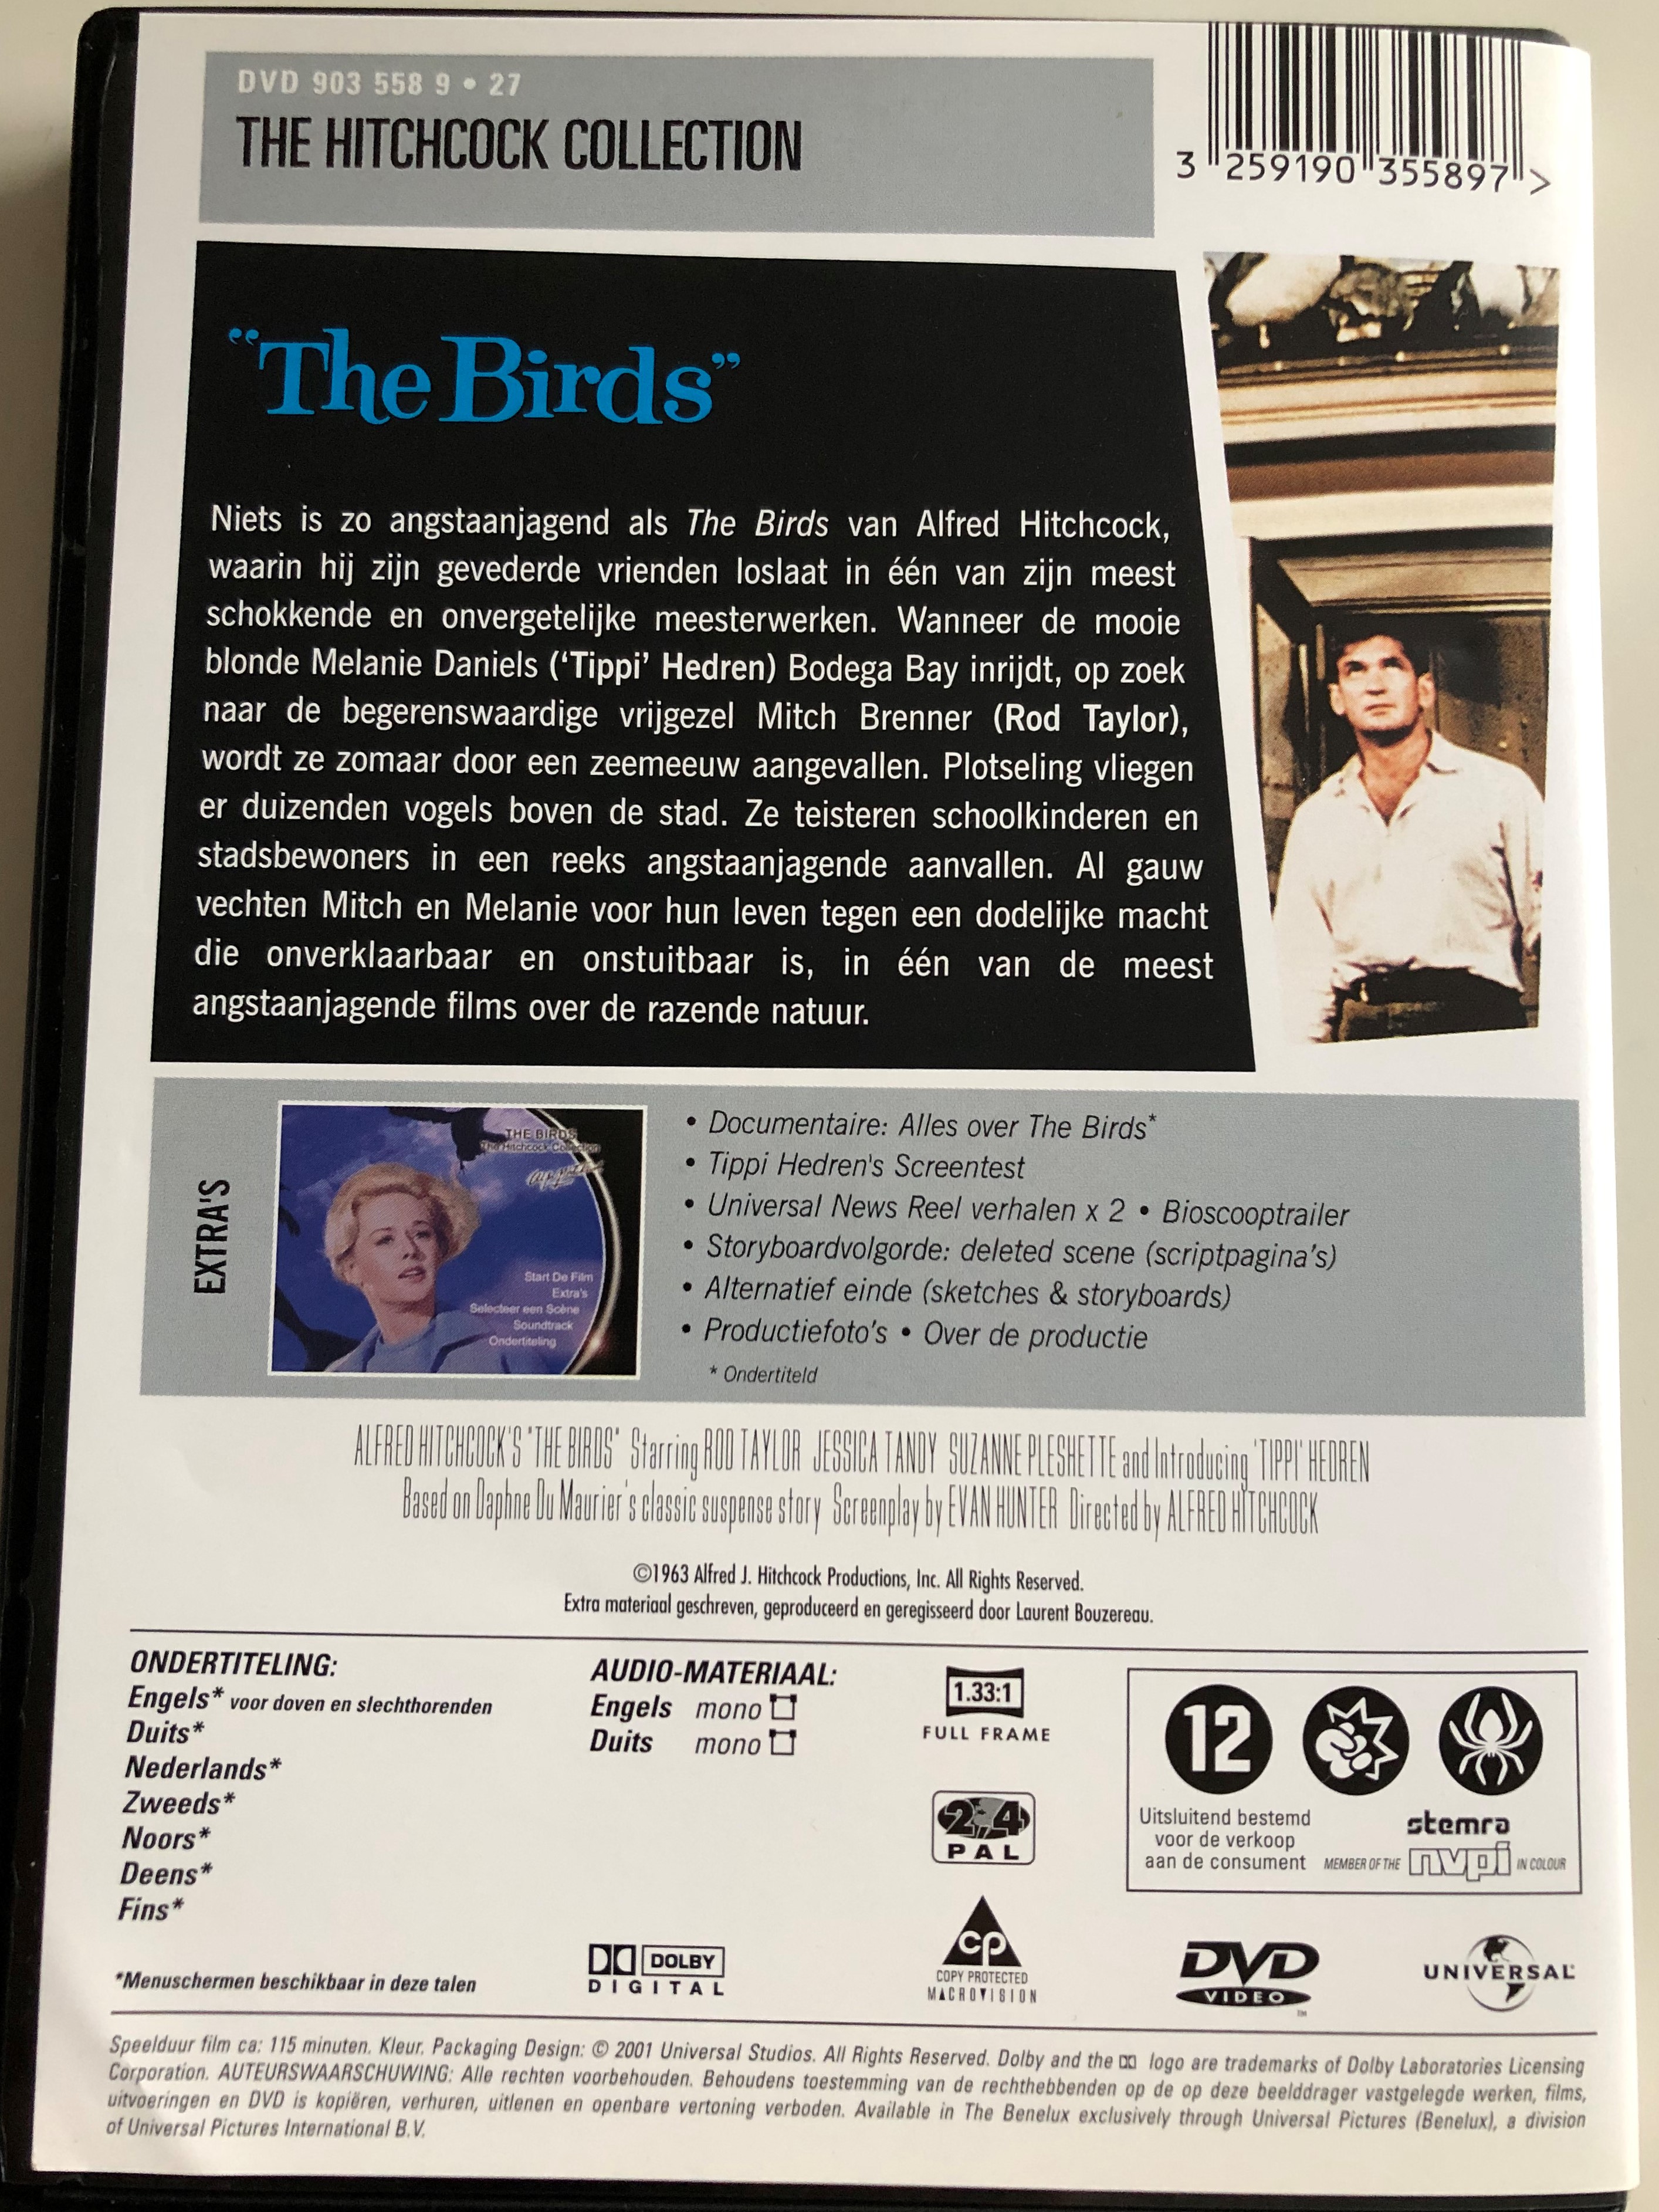 the-birds-dvd-1963-hitchcock-collection-directed-by-alfred-hitchcock-2.jpg